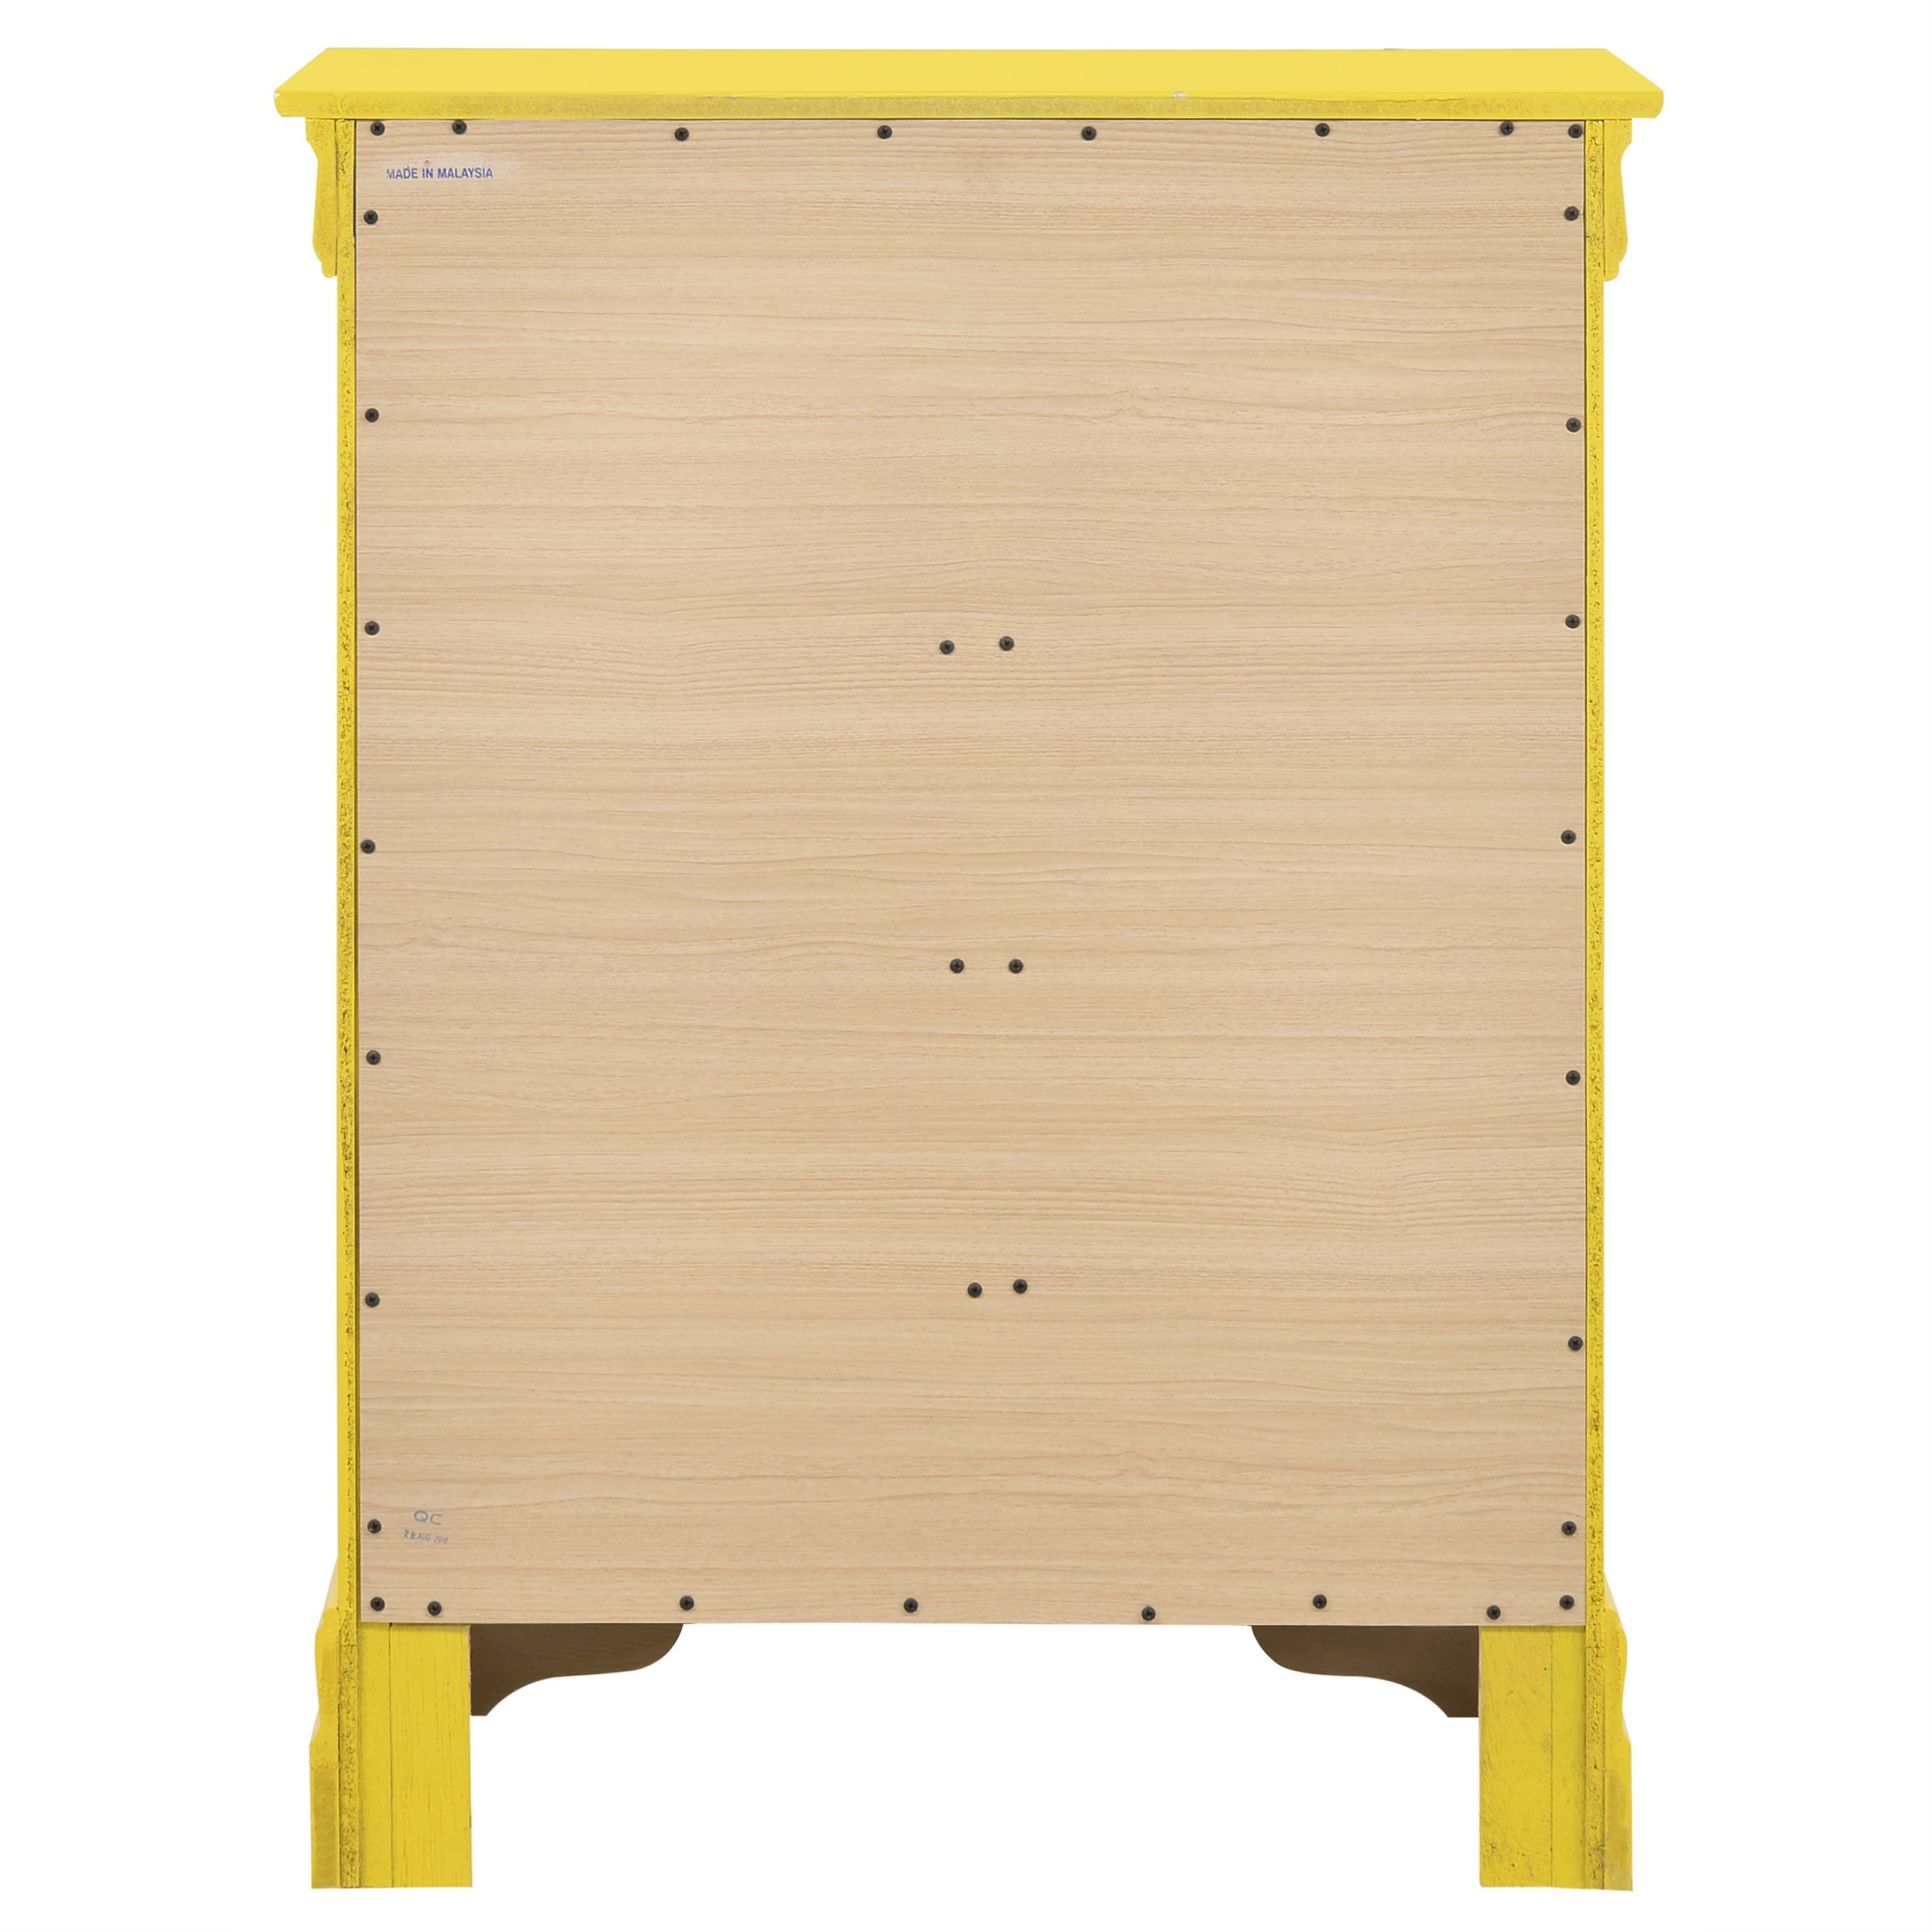 Passion Furniture Louis Phillipe Yellow 4 Drawer Chest of Drawers (41 in L. X 16 in W. X 41 in H.)